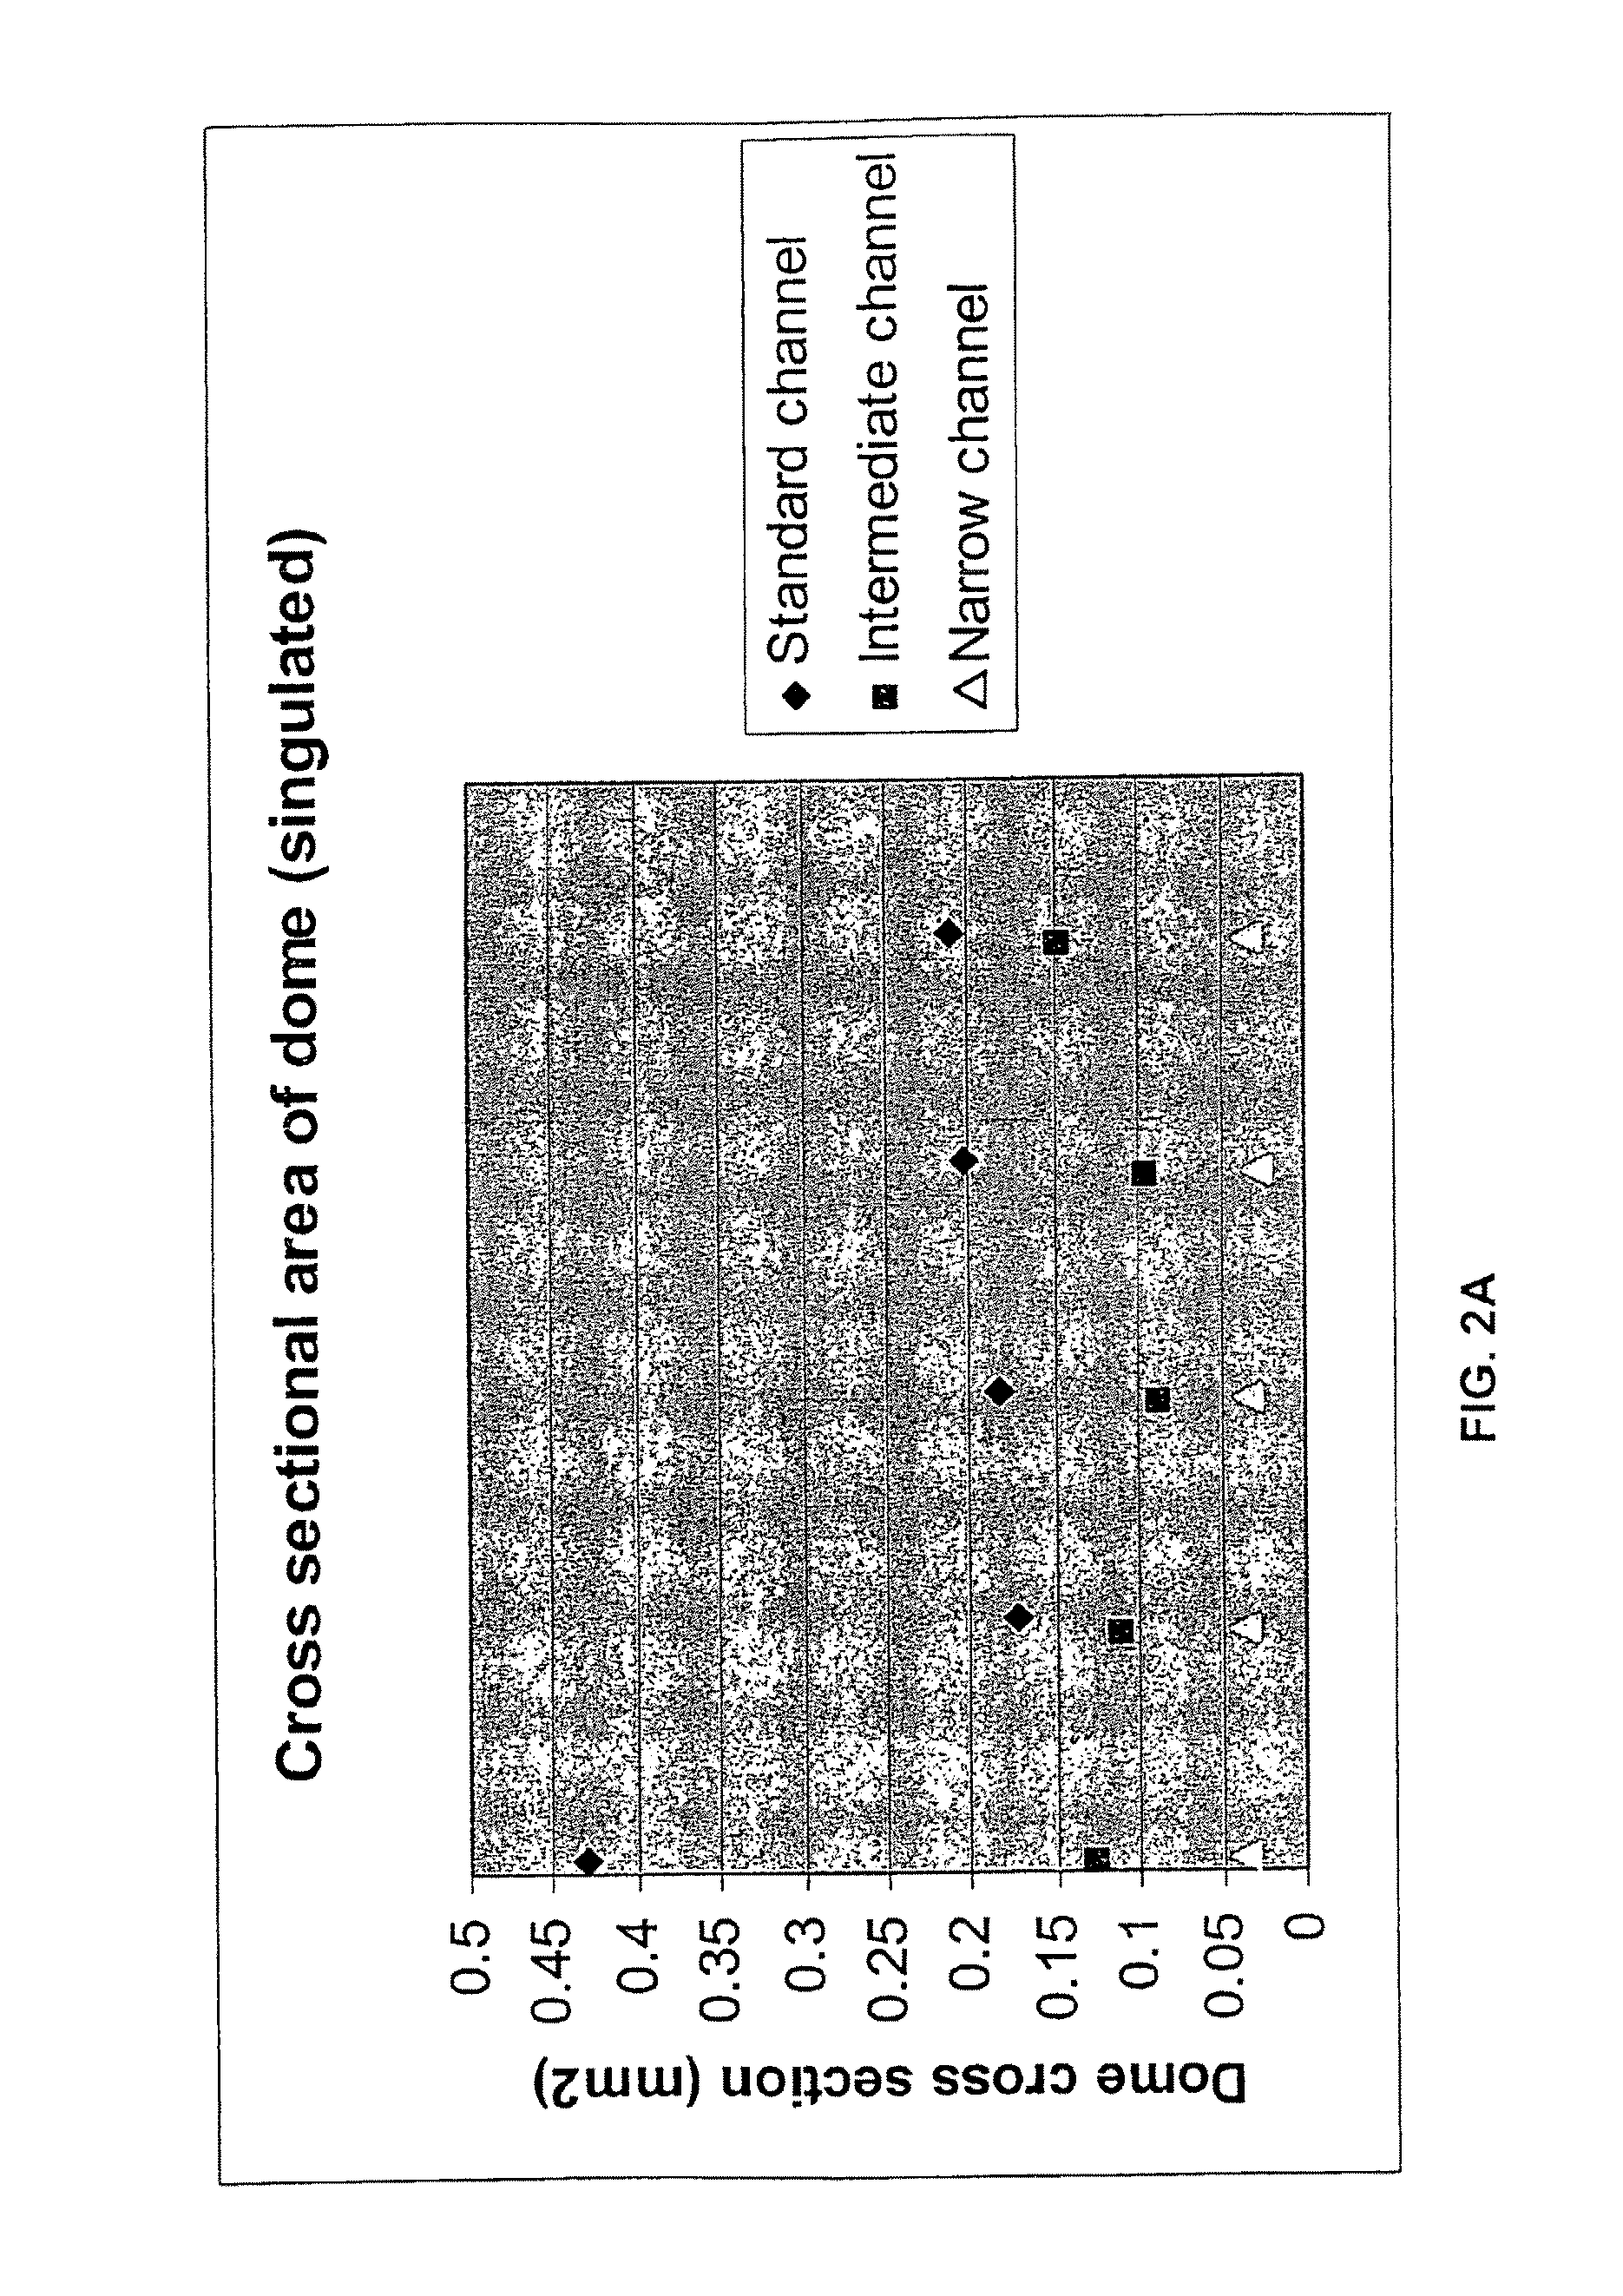 Biosensors and methods of using the same